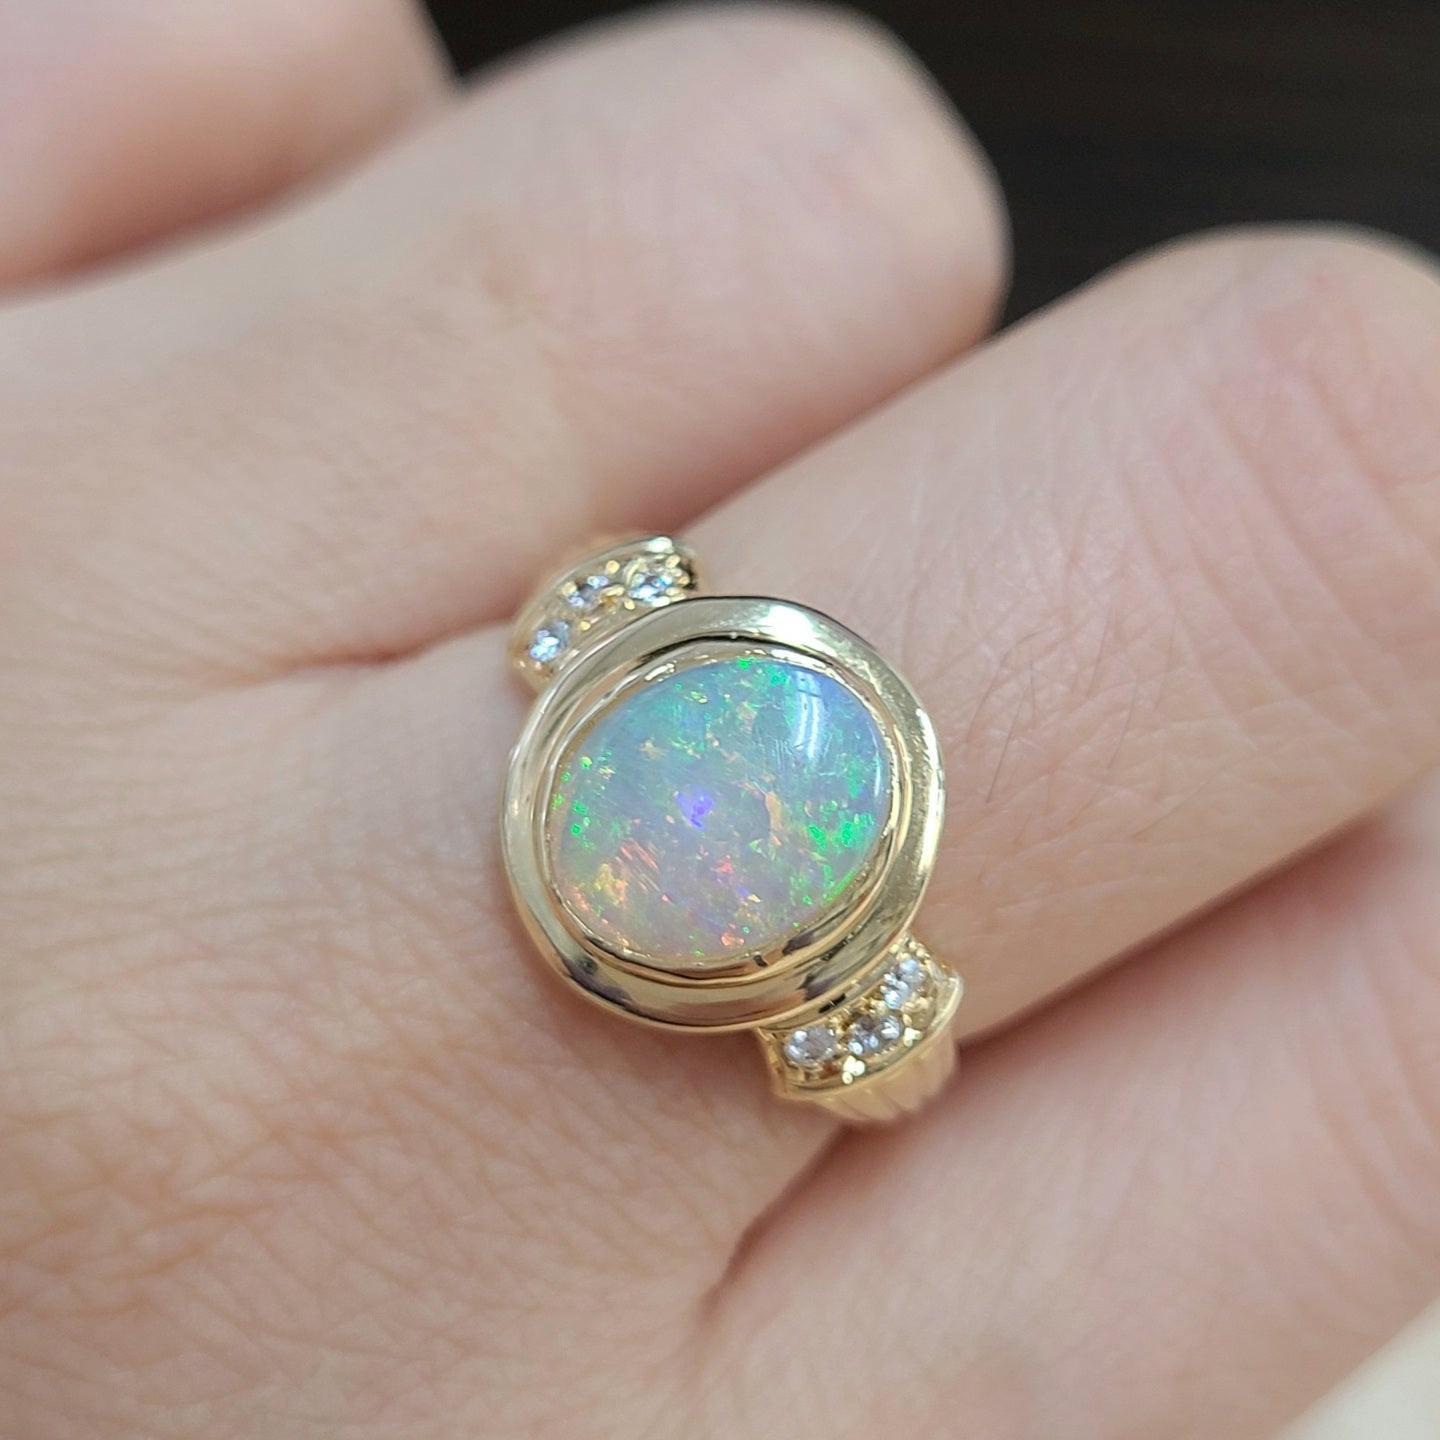 Rainbow opal with diamonds and K18 YG yellow gold 18k gold water opal ring with certificate of authenticity.